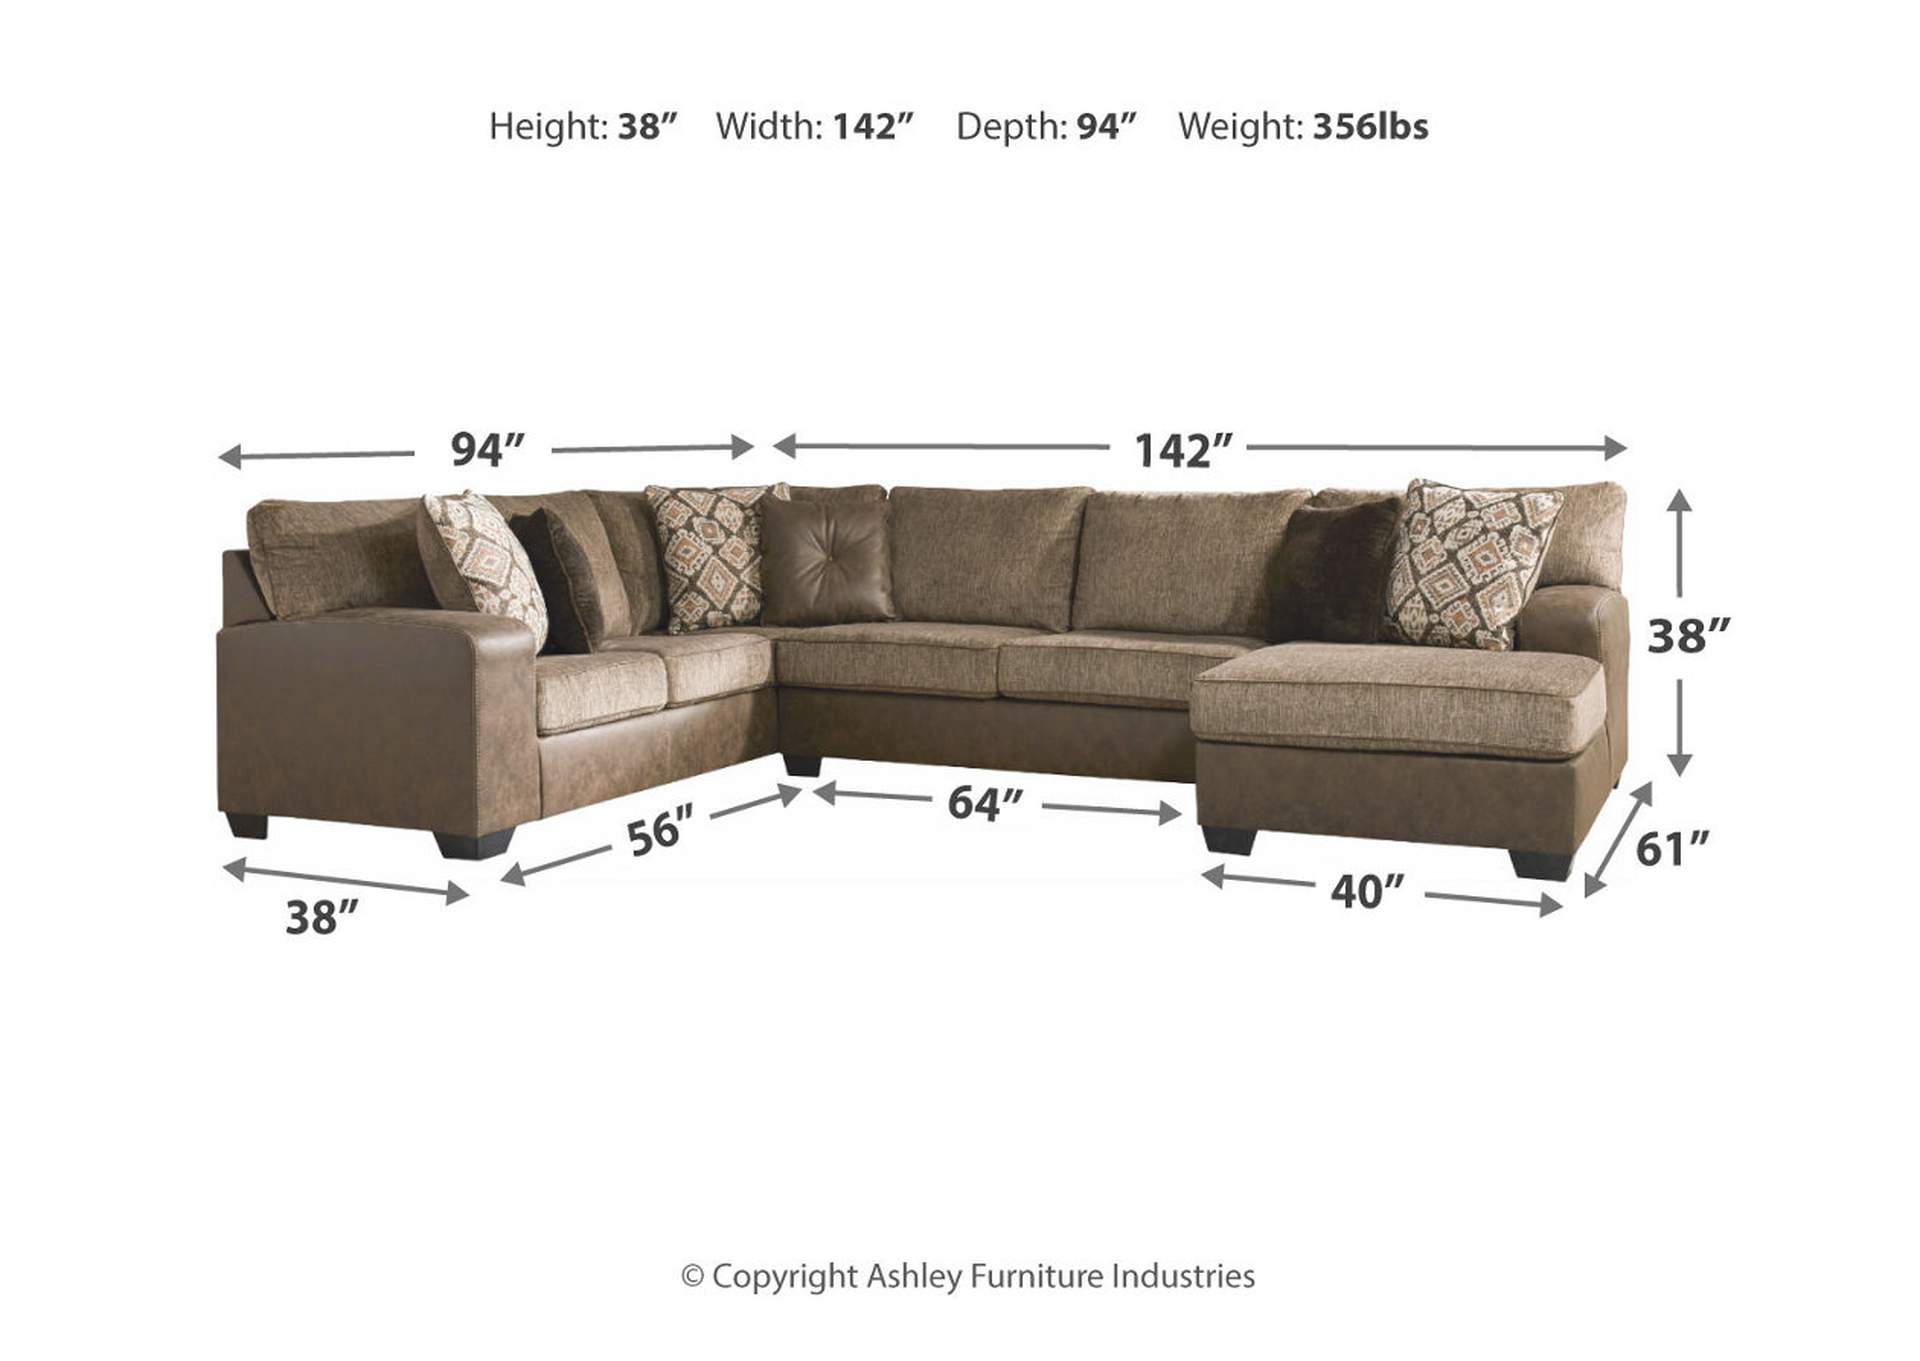 Abalone 3-Piece Sectional with Chair,Benchcraft